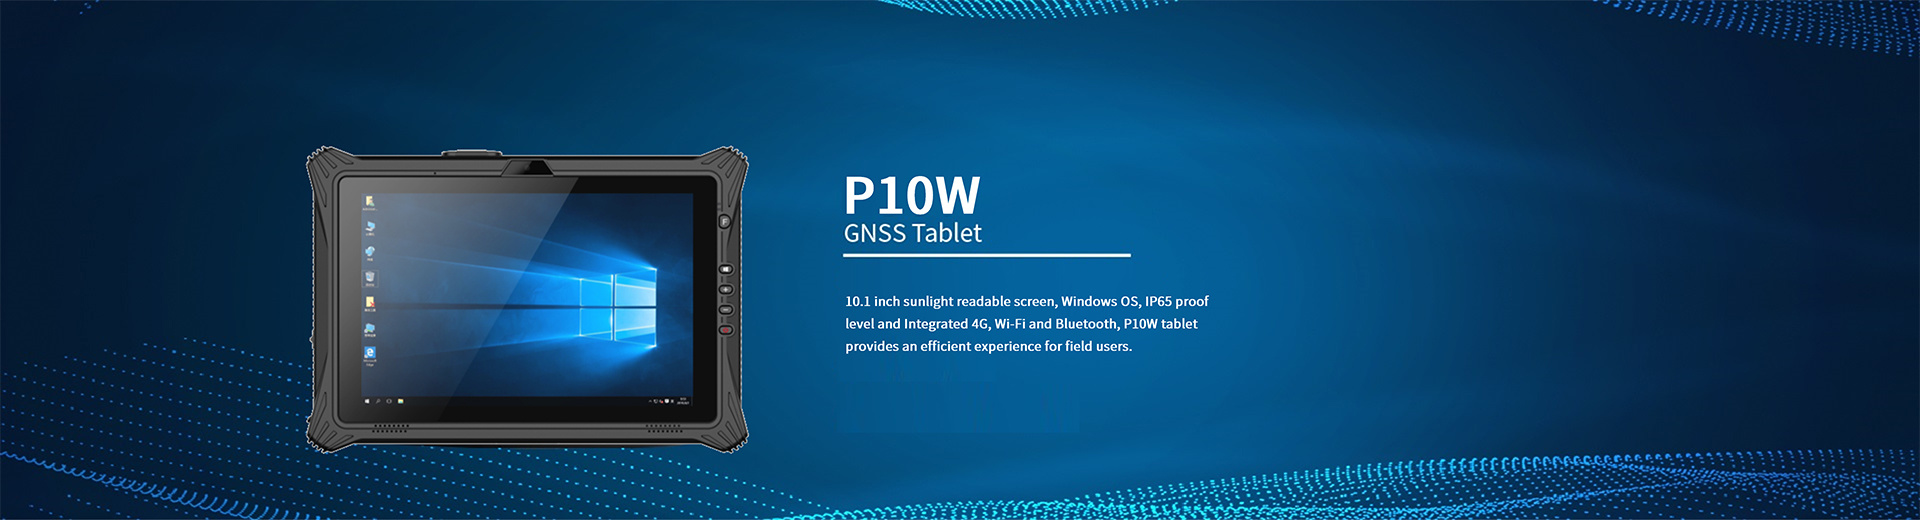 P10W Tablet